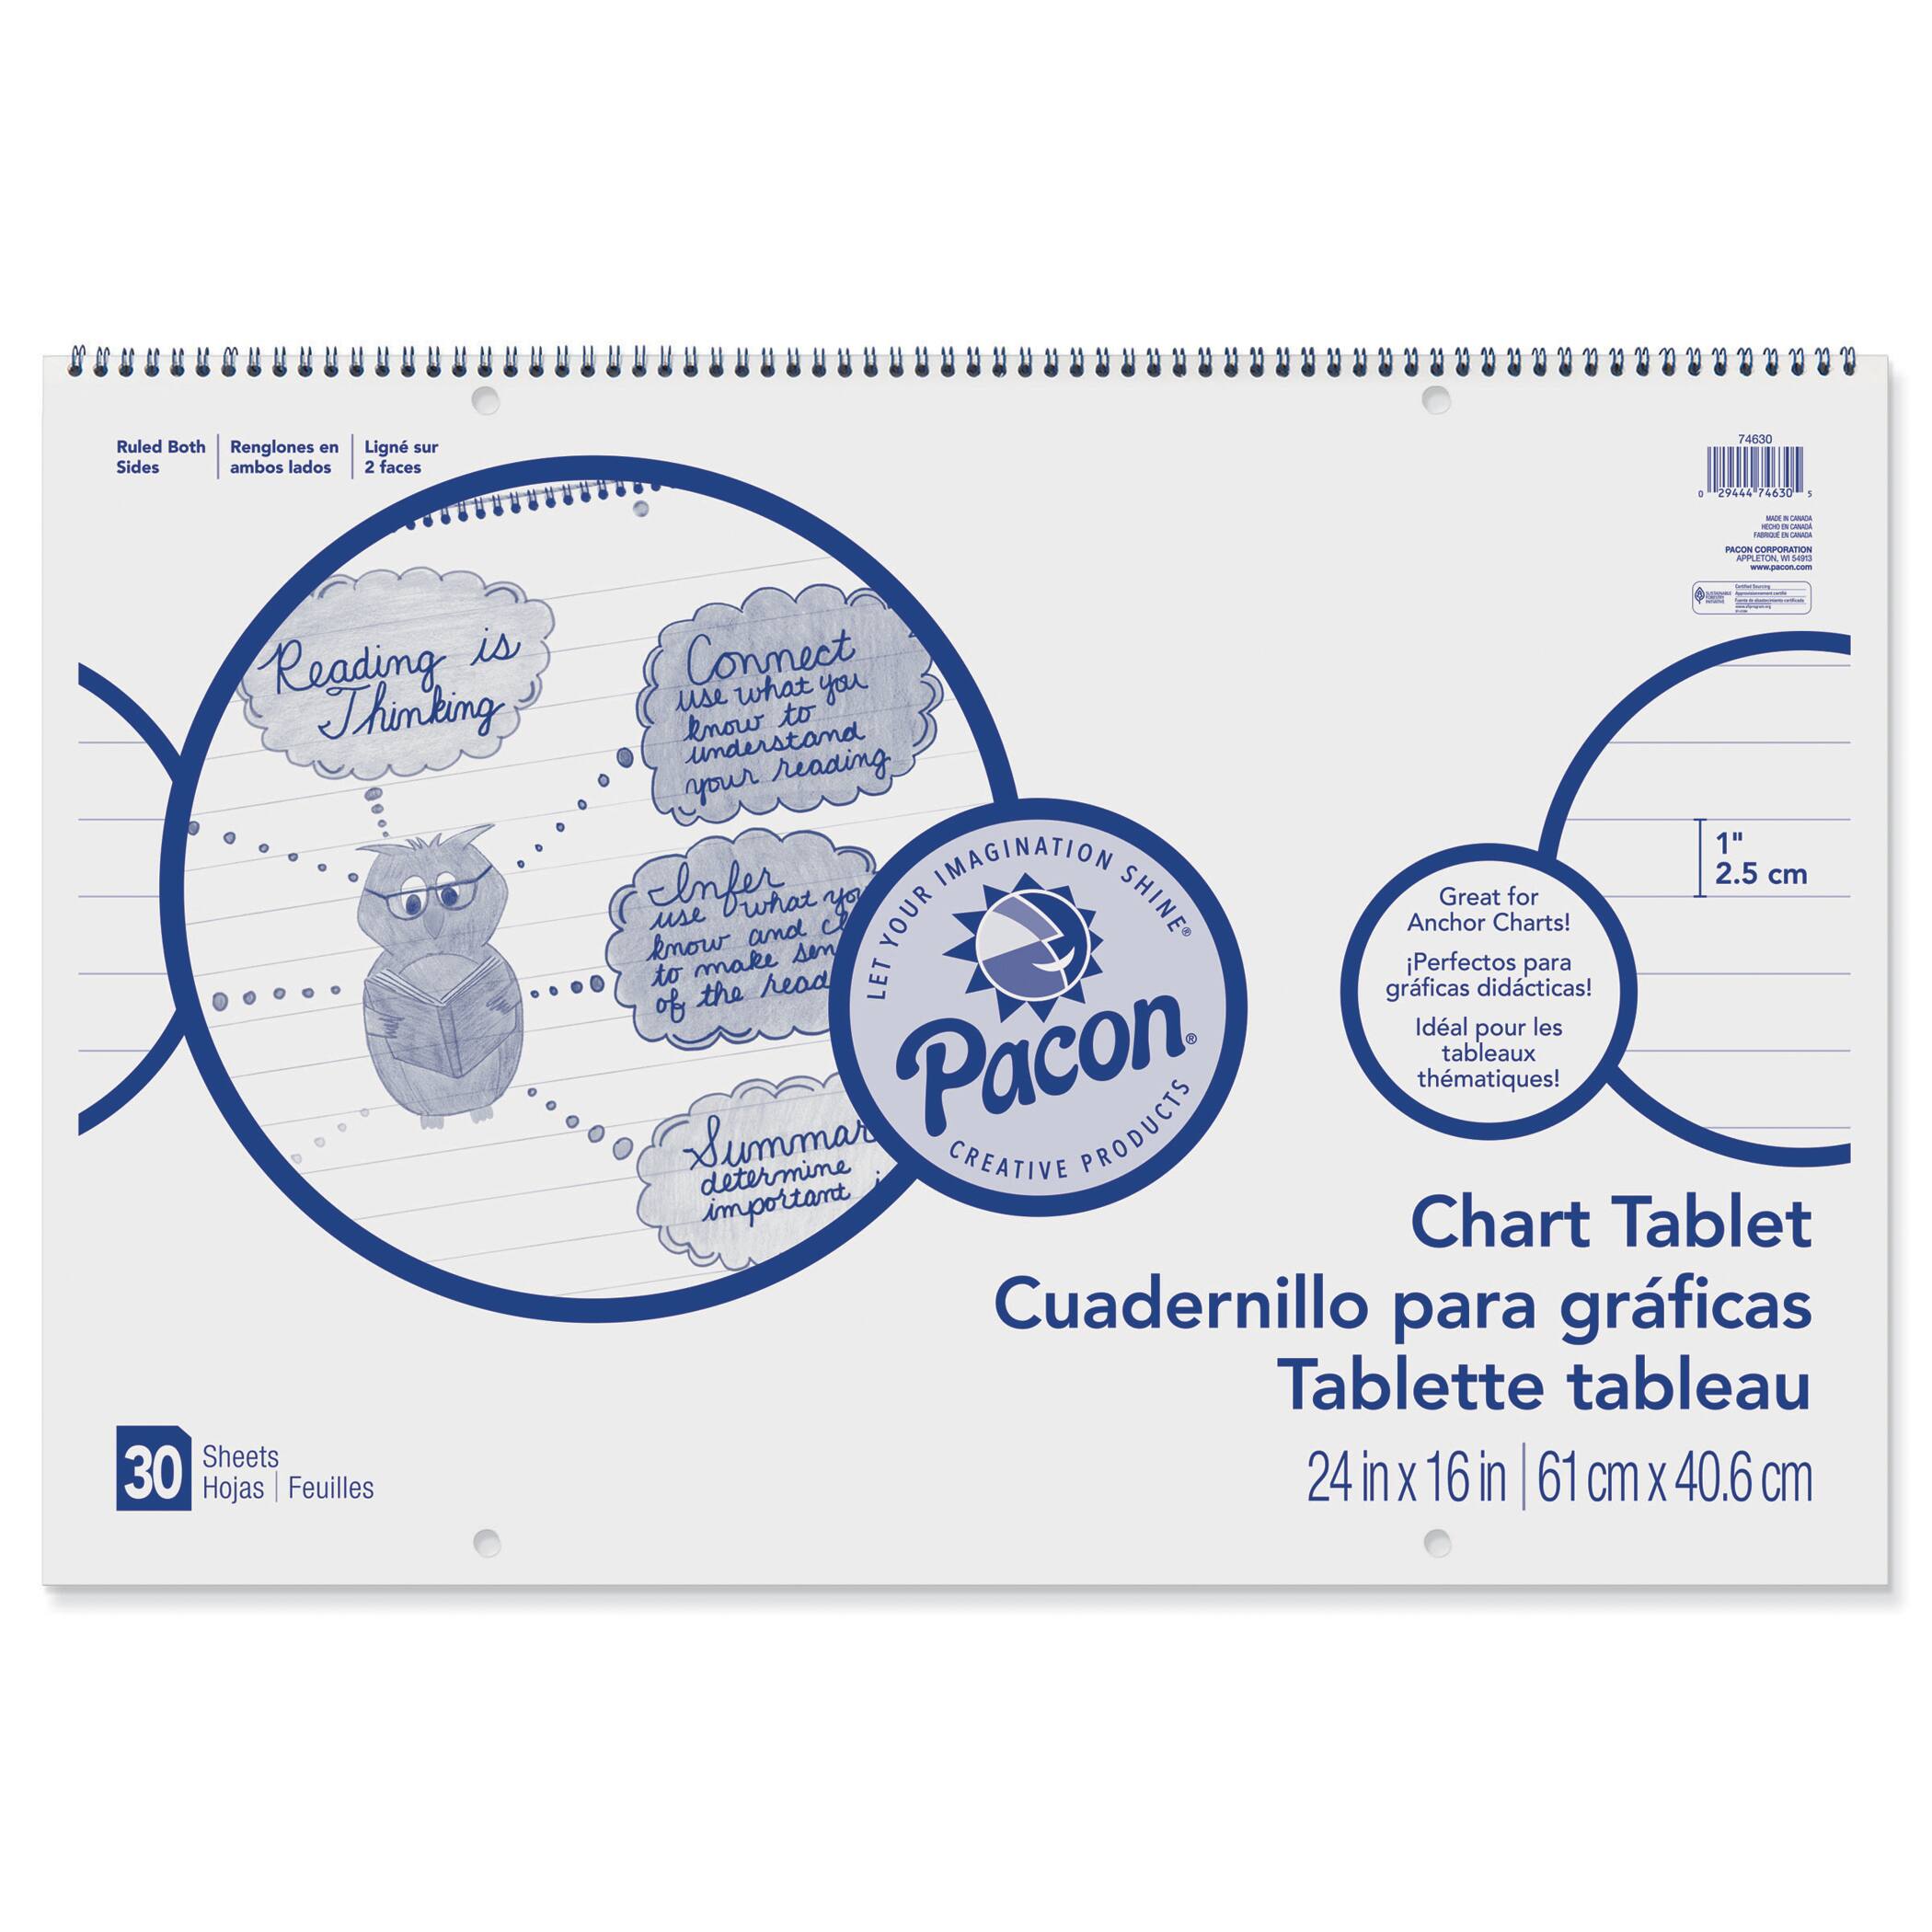 Chart Tablet - Pacon Creative Products